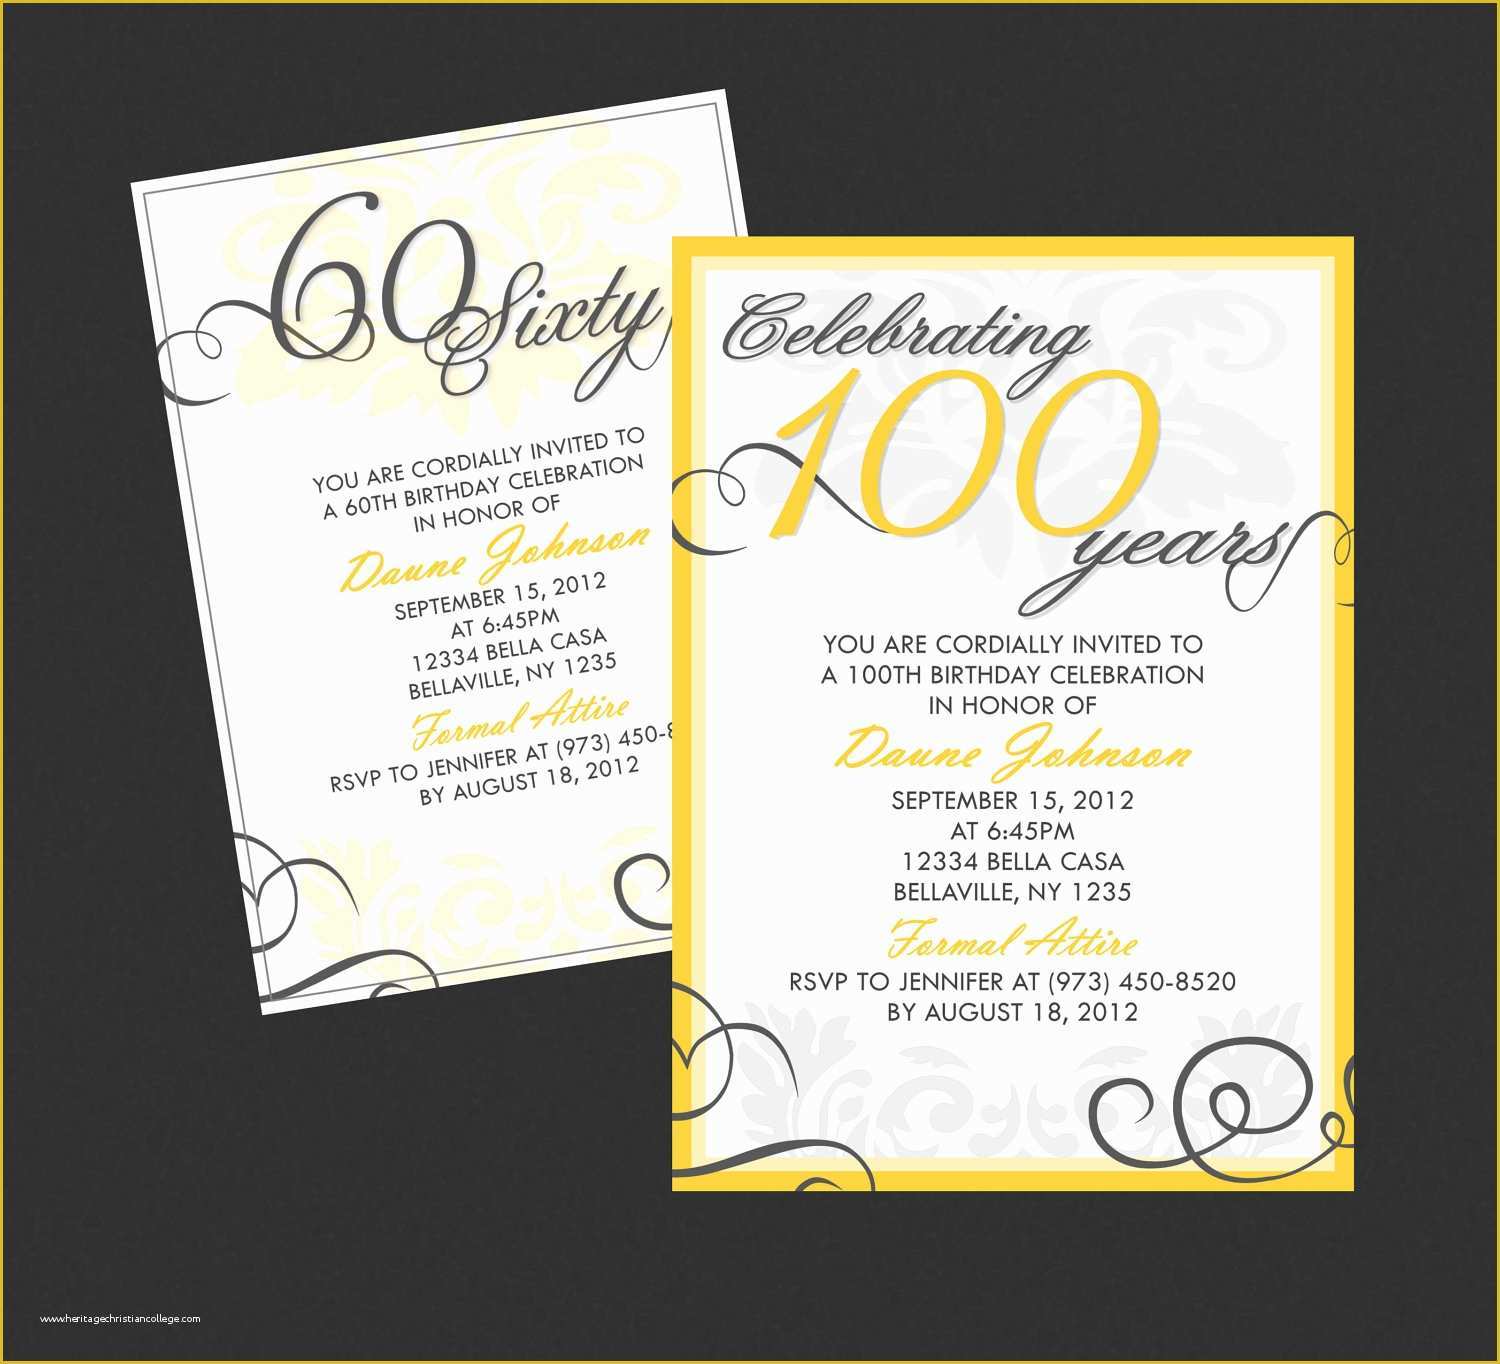 Free Birthday Invitation Templates for Adults Of 40th Birthday Ideas Free Birthday Invitation Templates Adults